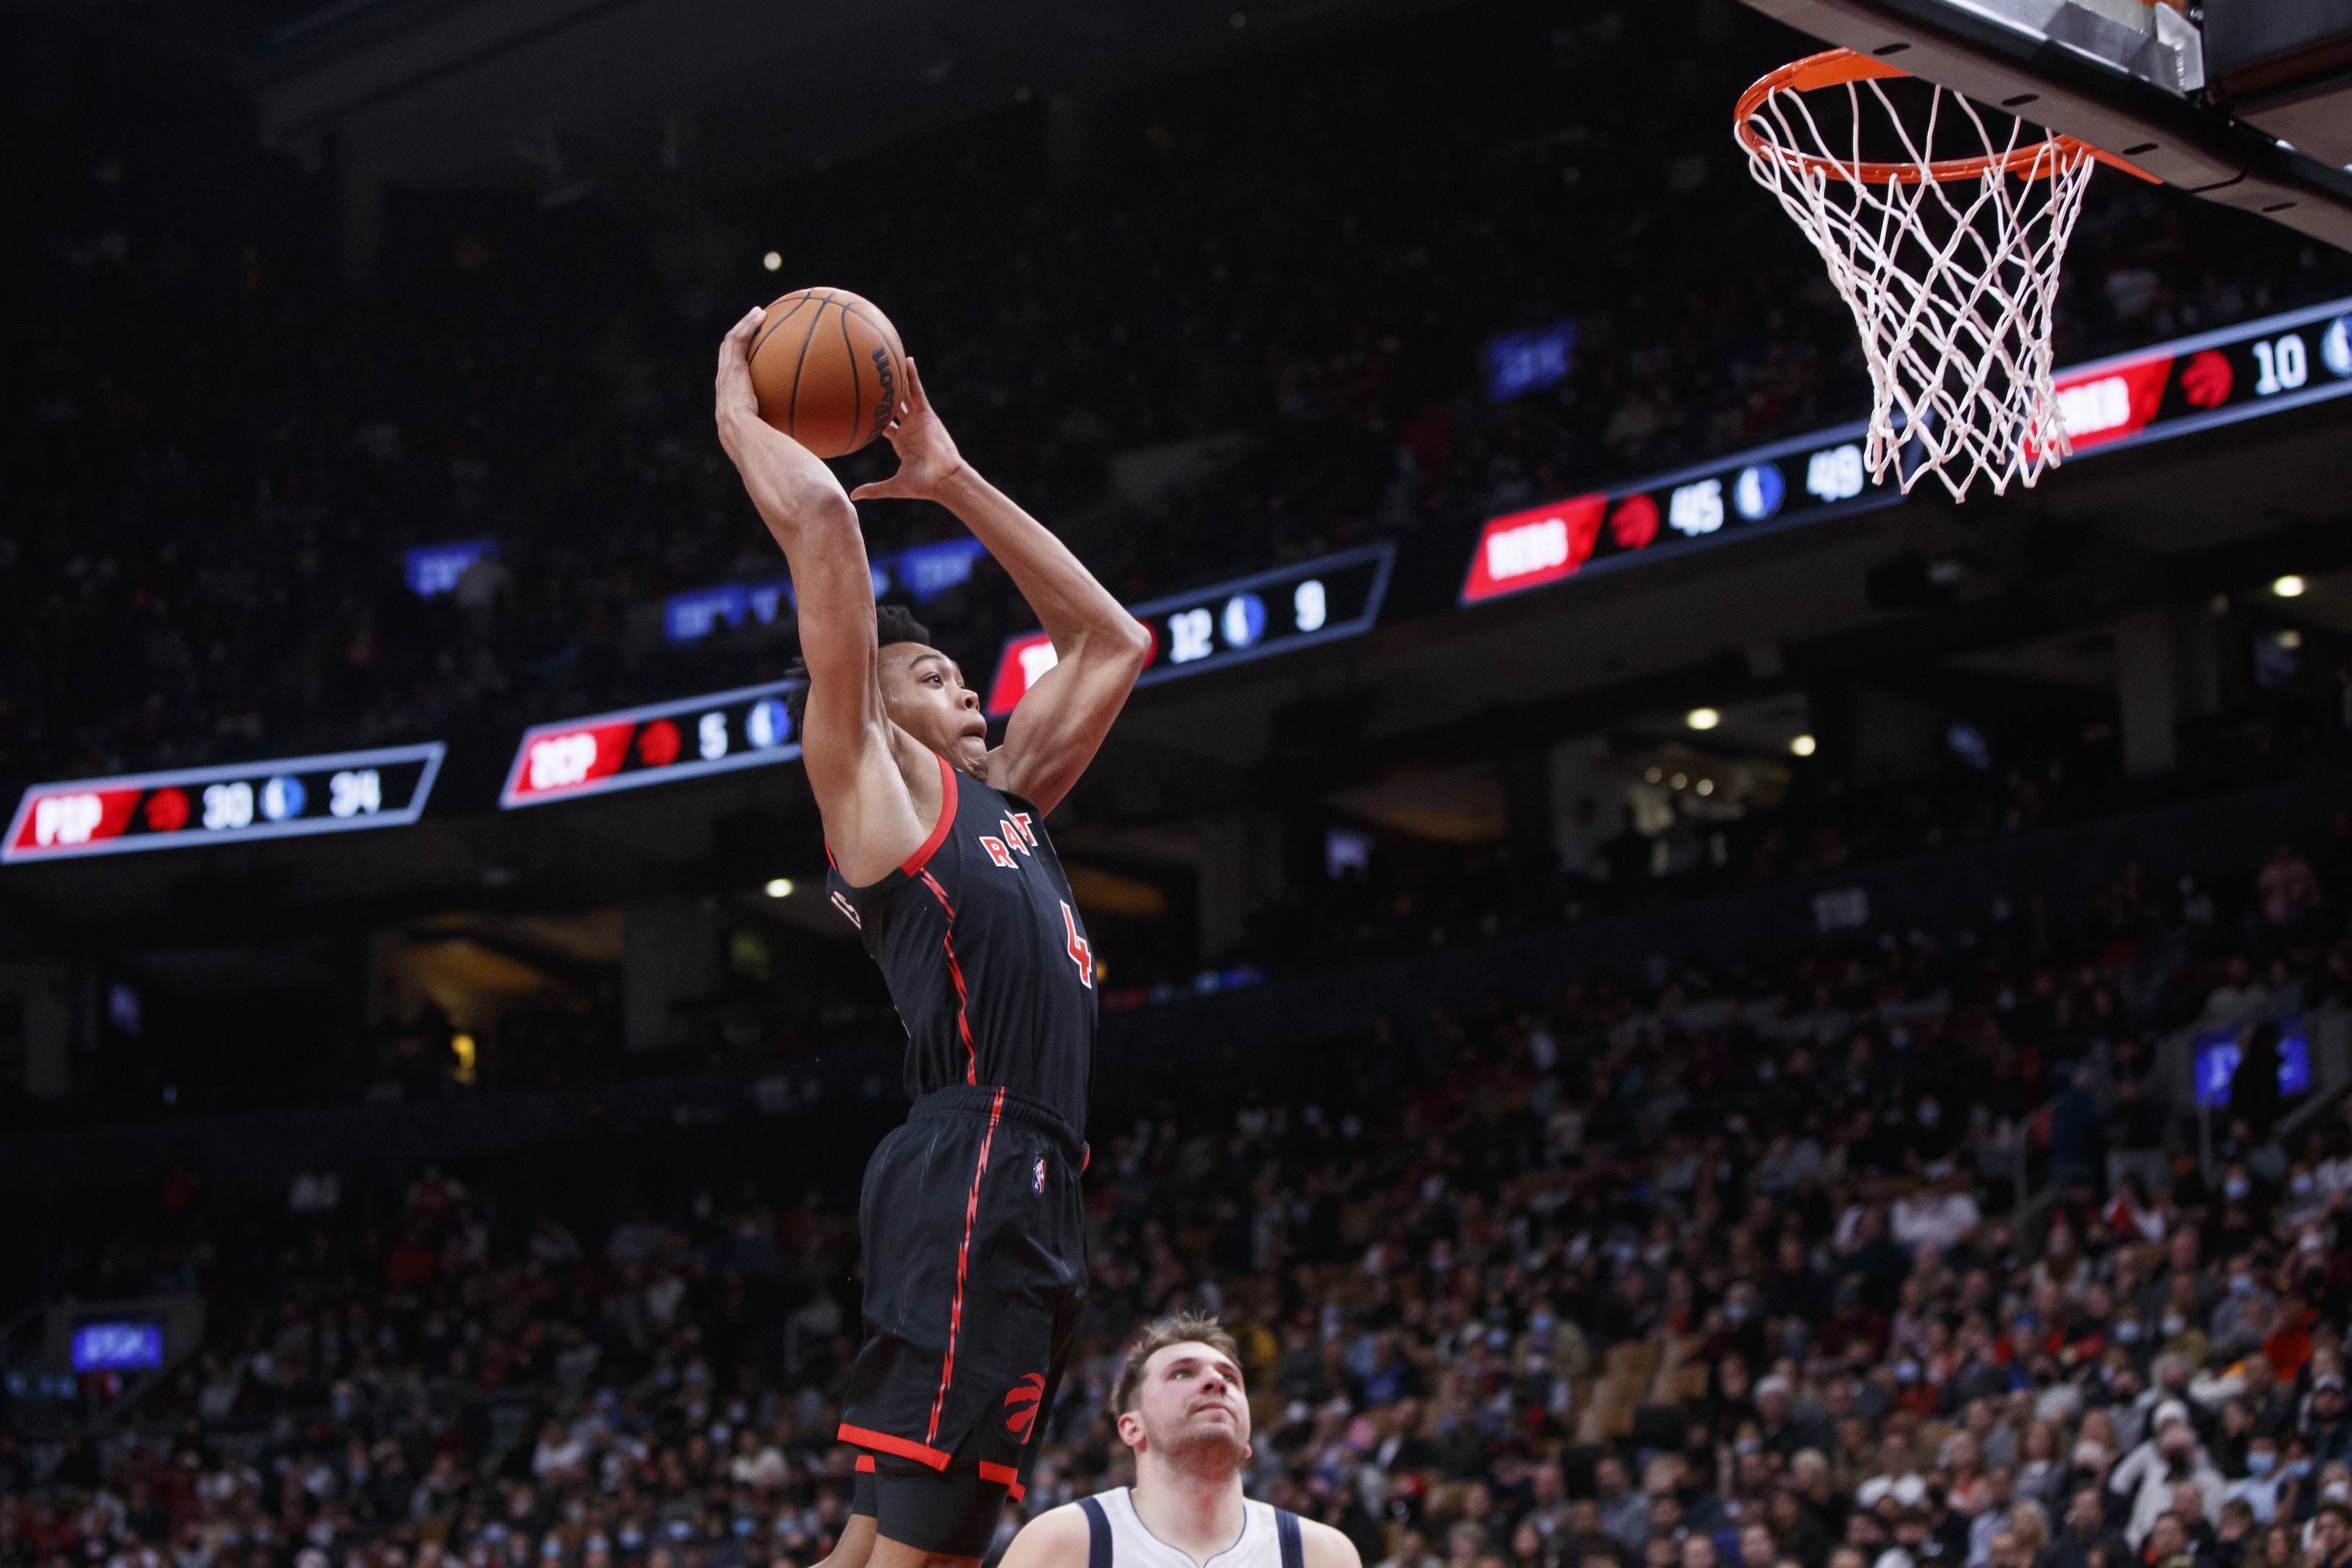 Raptors rookie Scottie Barnes goes to the basket during a game against the Mavericks